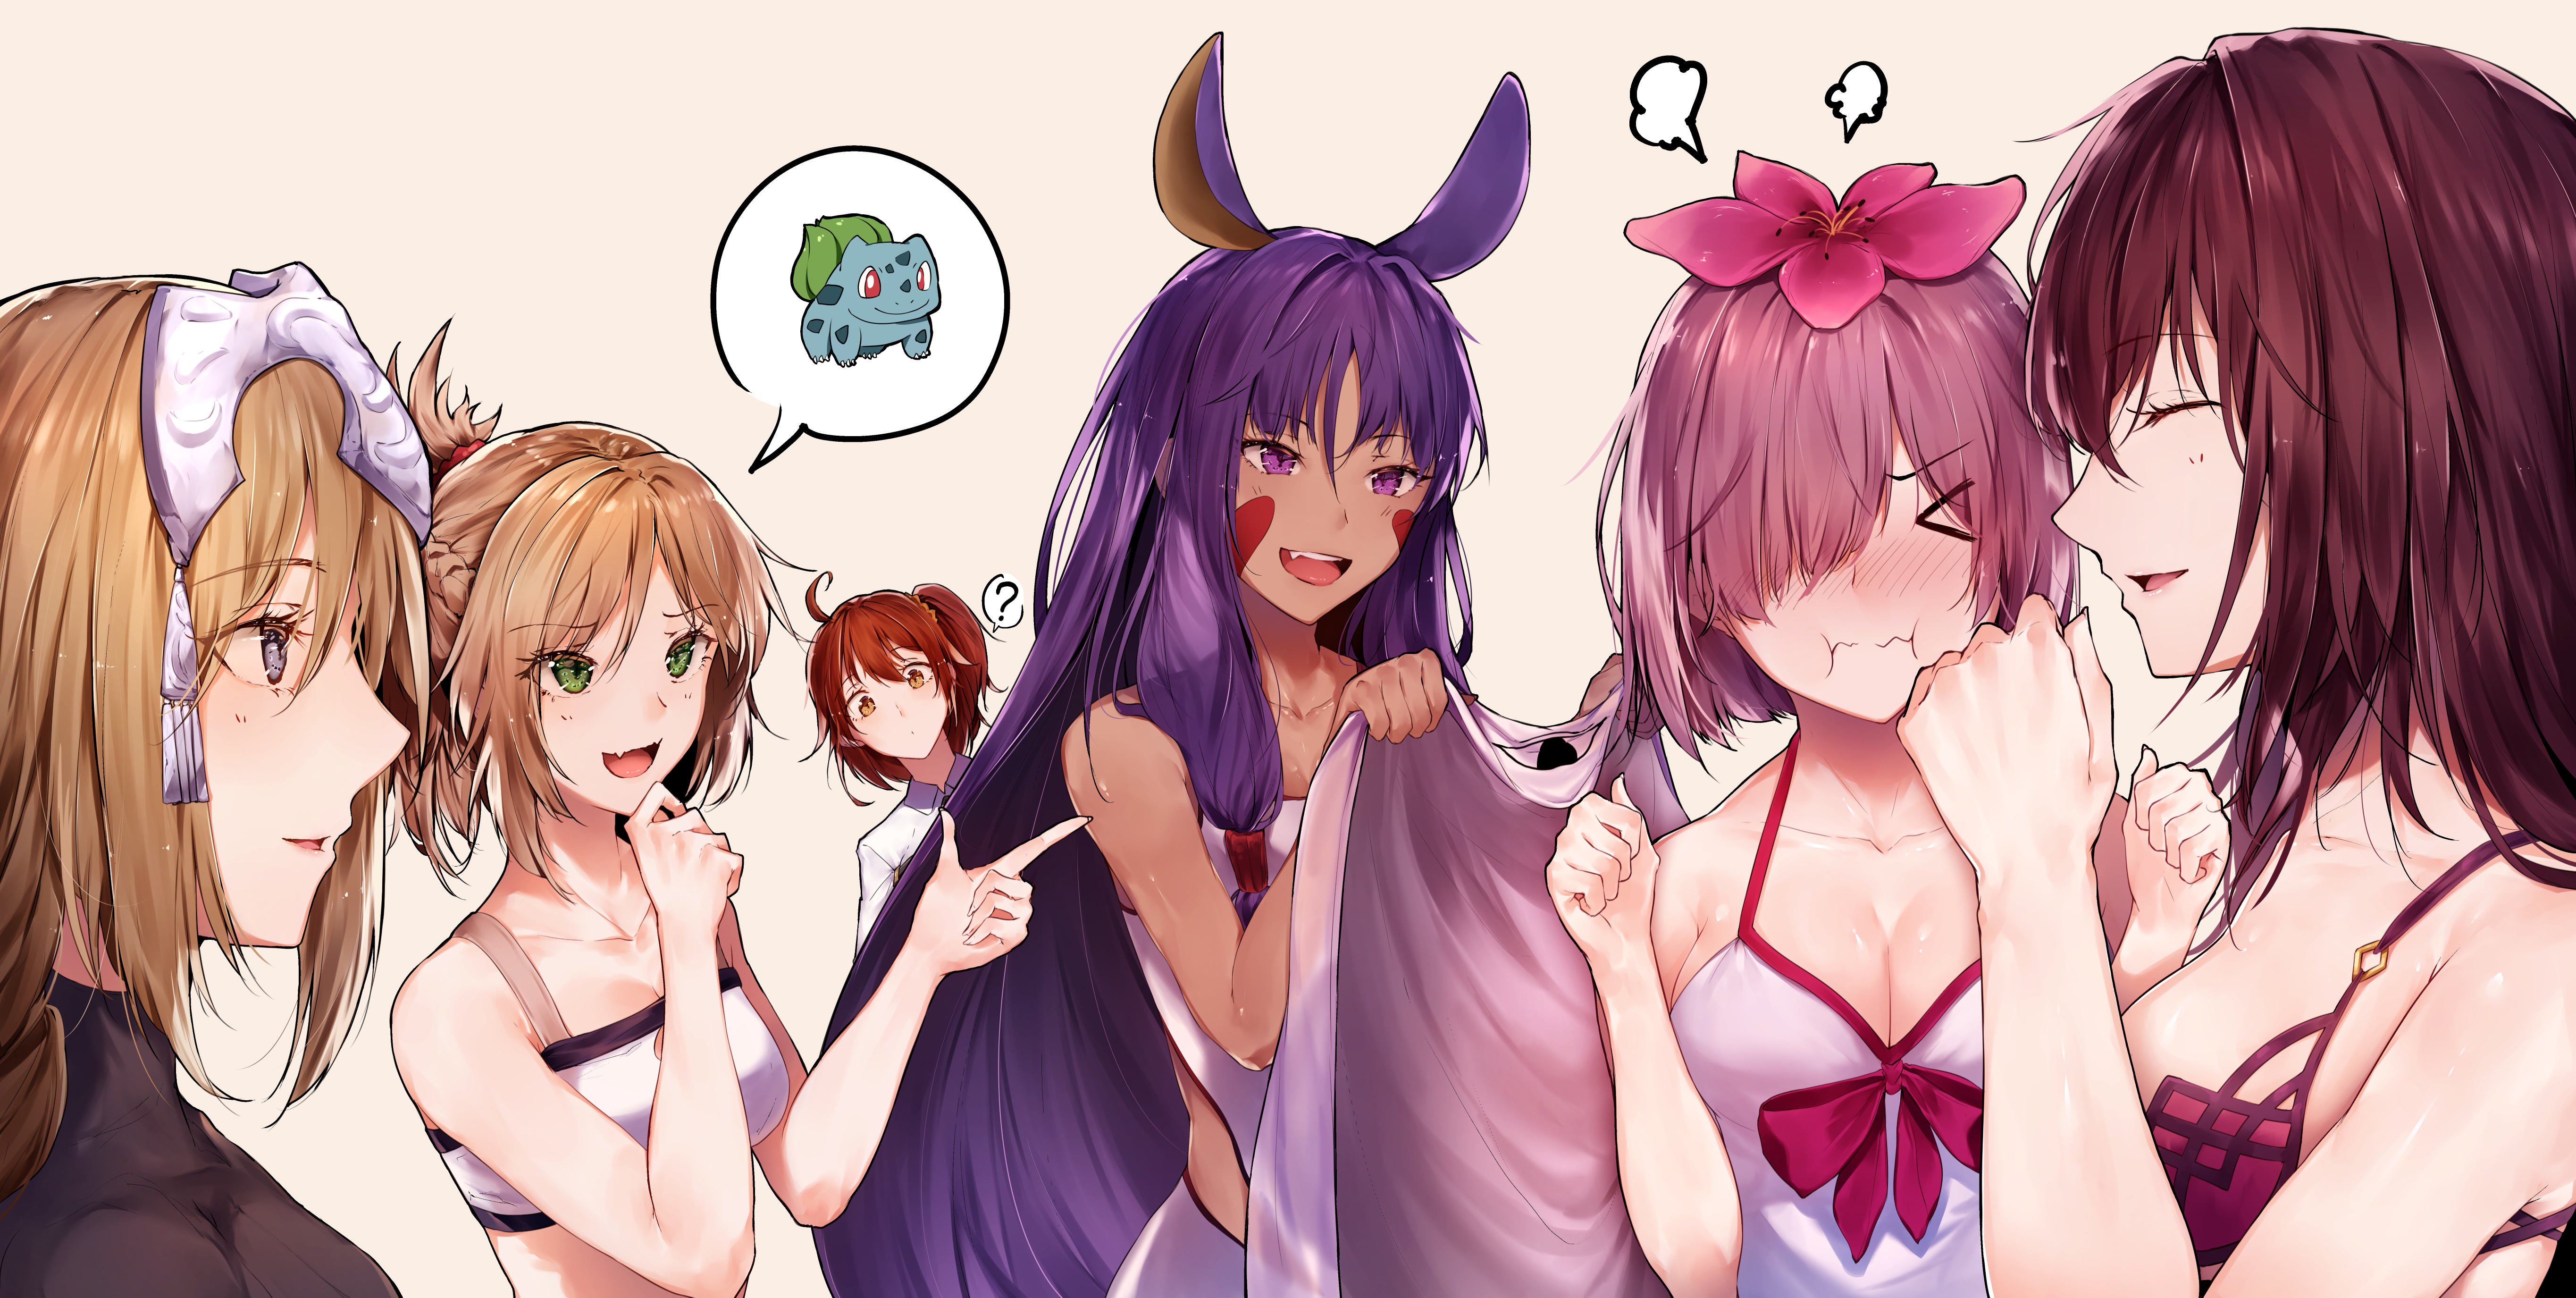 Anime 5459x2750 anime girls anime Fate/Grand Order Nitocris (Fate/Grand Order) Mordred (Fate/Apocrypha) Mash Kyrielight Fate series Scathach Jeanne d'Arc (Fate) Fujimaru Ritsuka artwork hplay blushing smiling speech bubble question mark Pokémon group of women flower in hair crossover